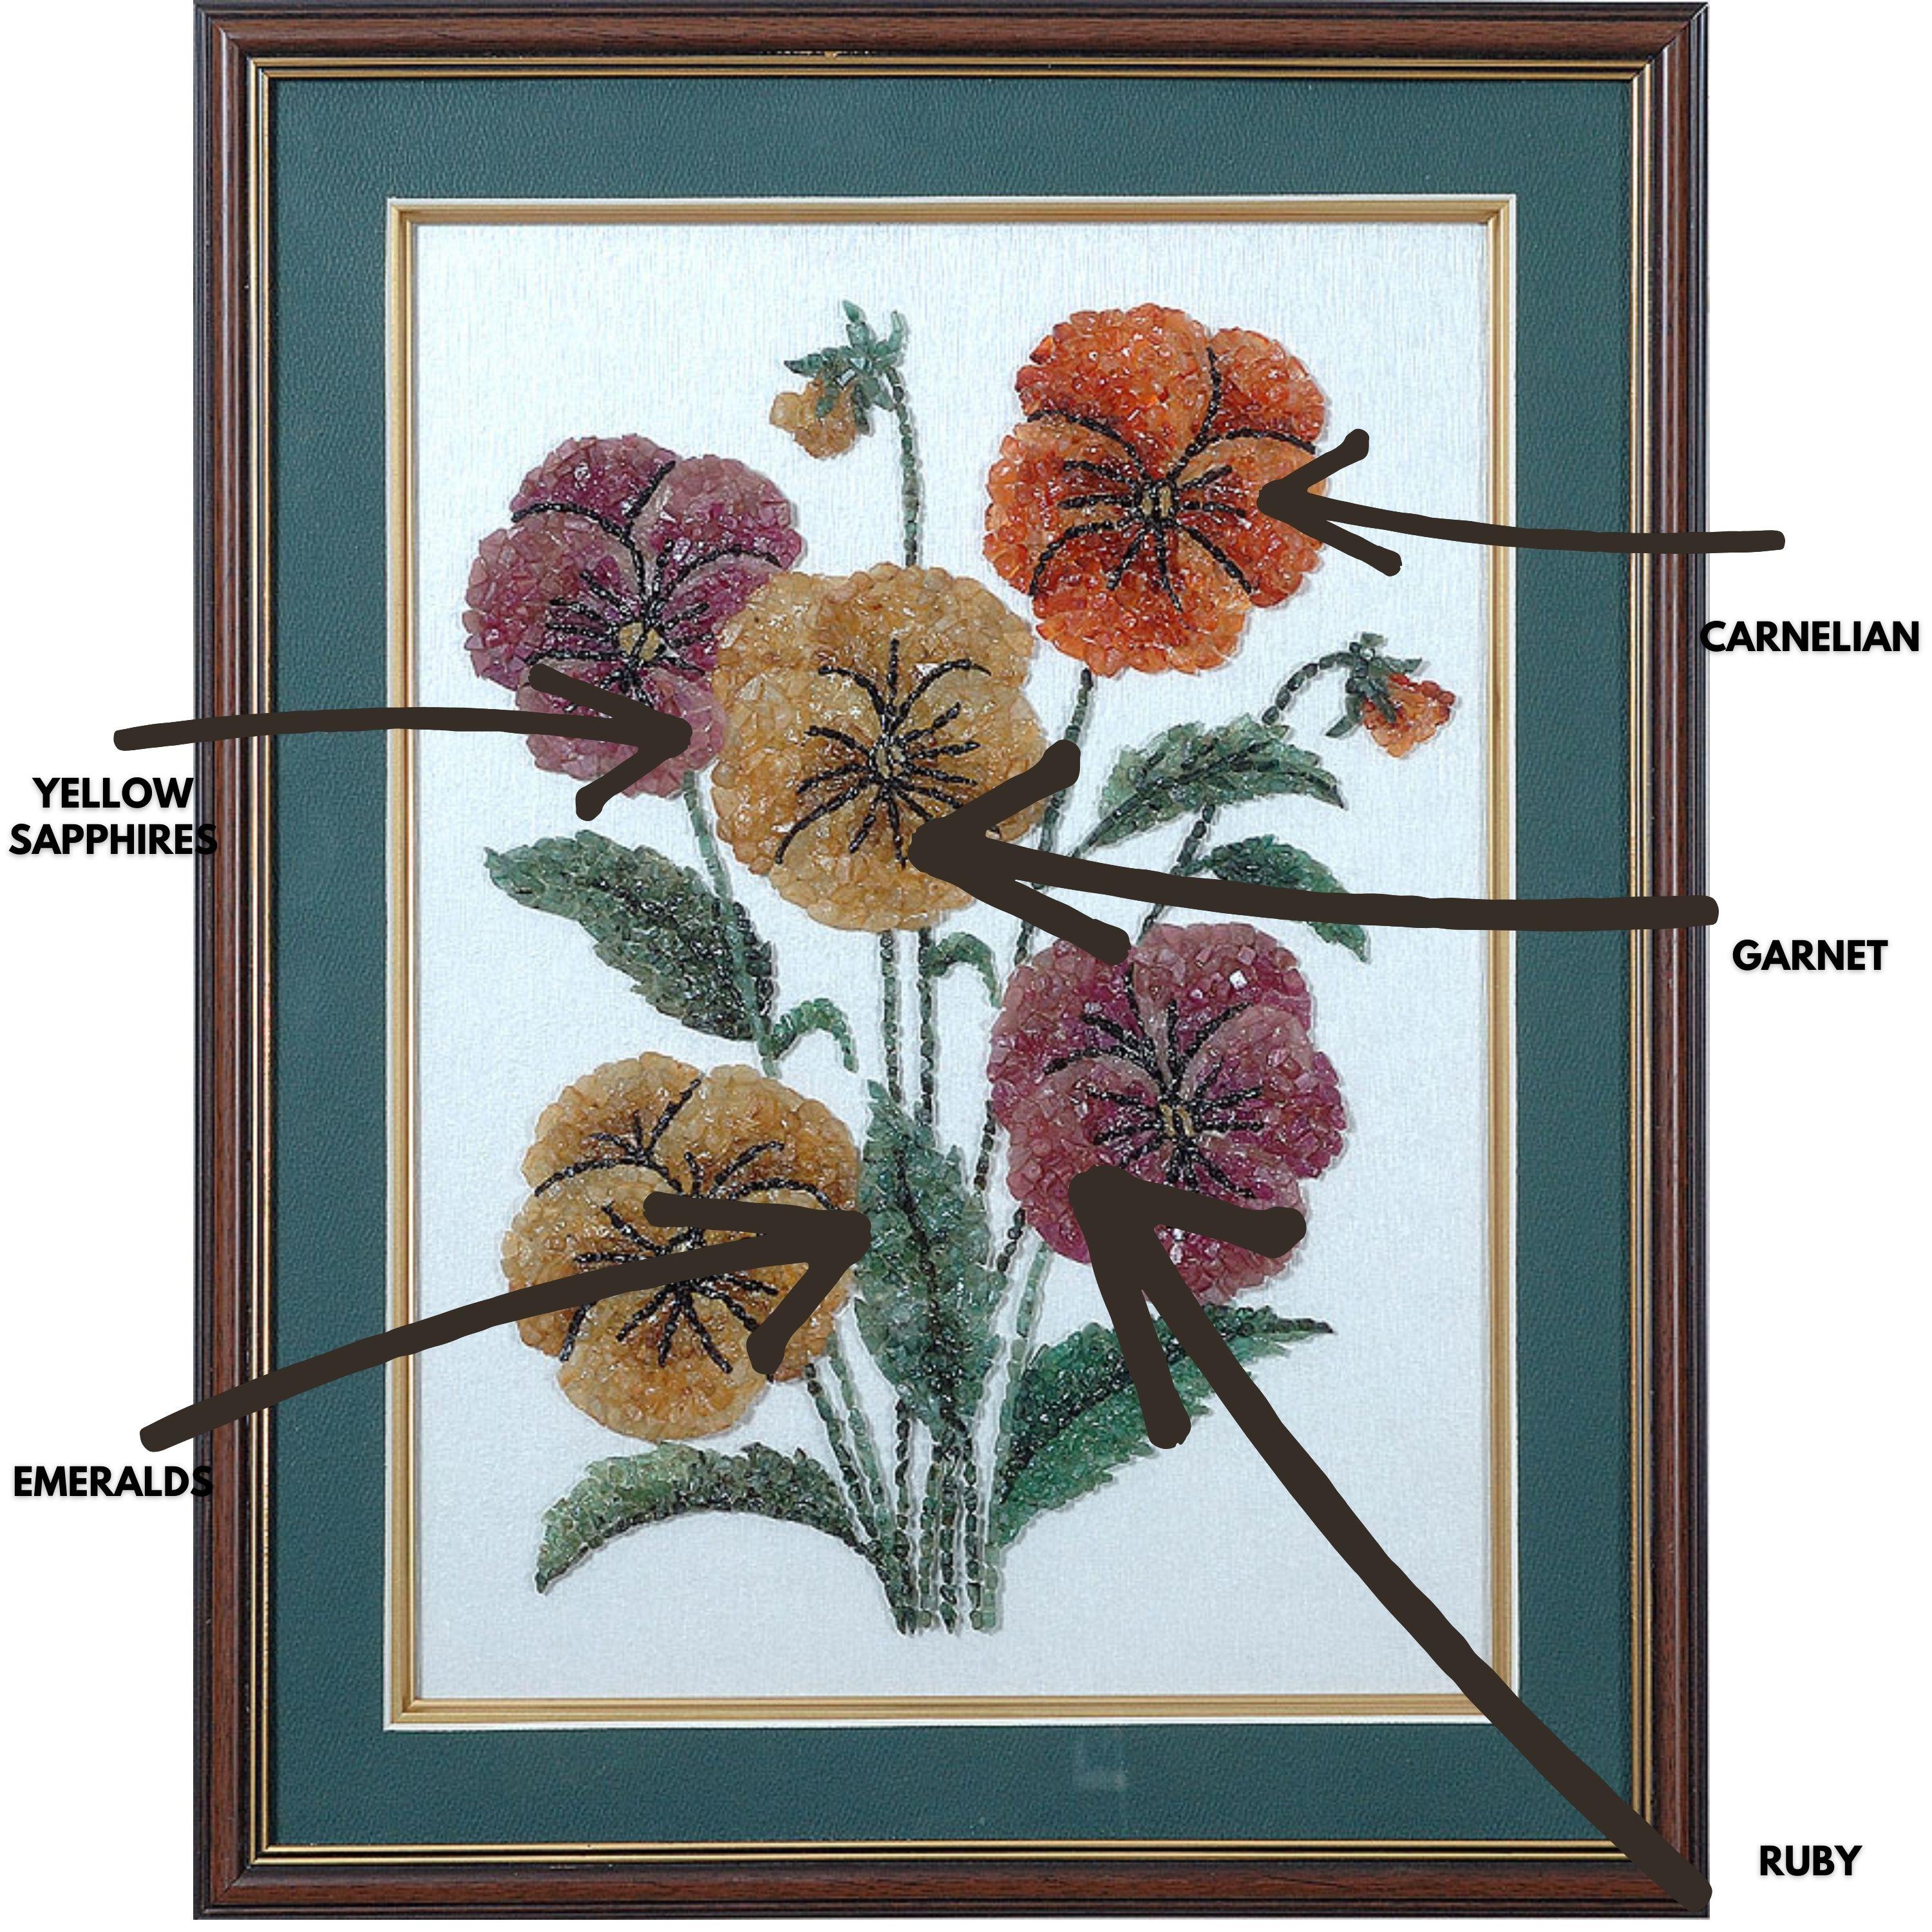 A very gorgeous Floral artwork made using Ruby, Emerald, Yellow Sapphire, Carnelian & Garnett. The gemstones used in this artwork is completely natural, without any treatment. The size of the artwork is 20 inches x 16 inches. The frame is of a